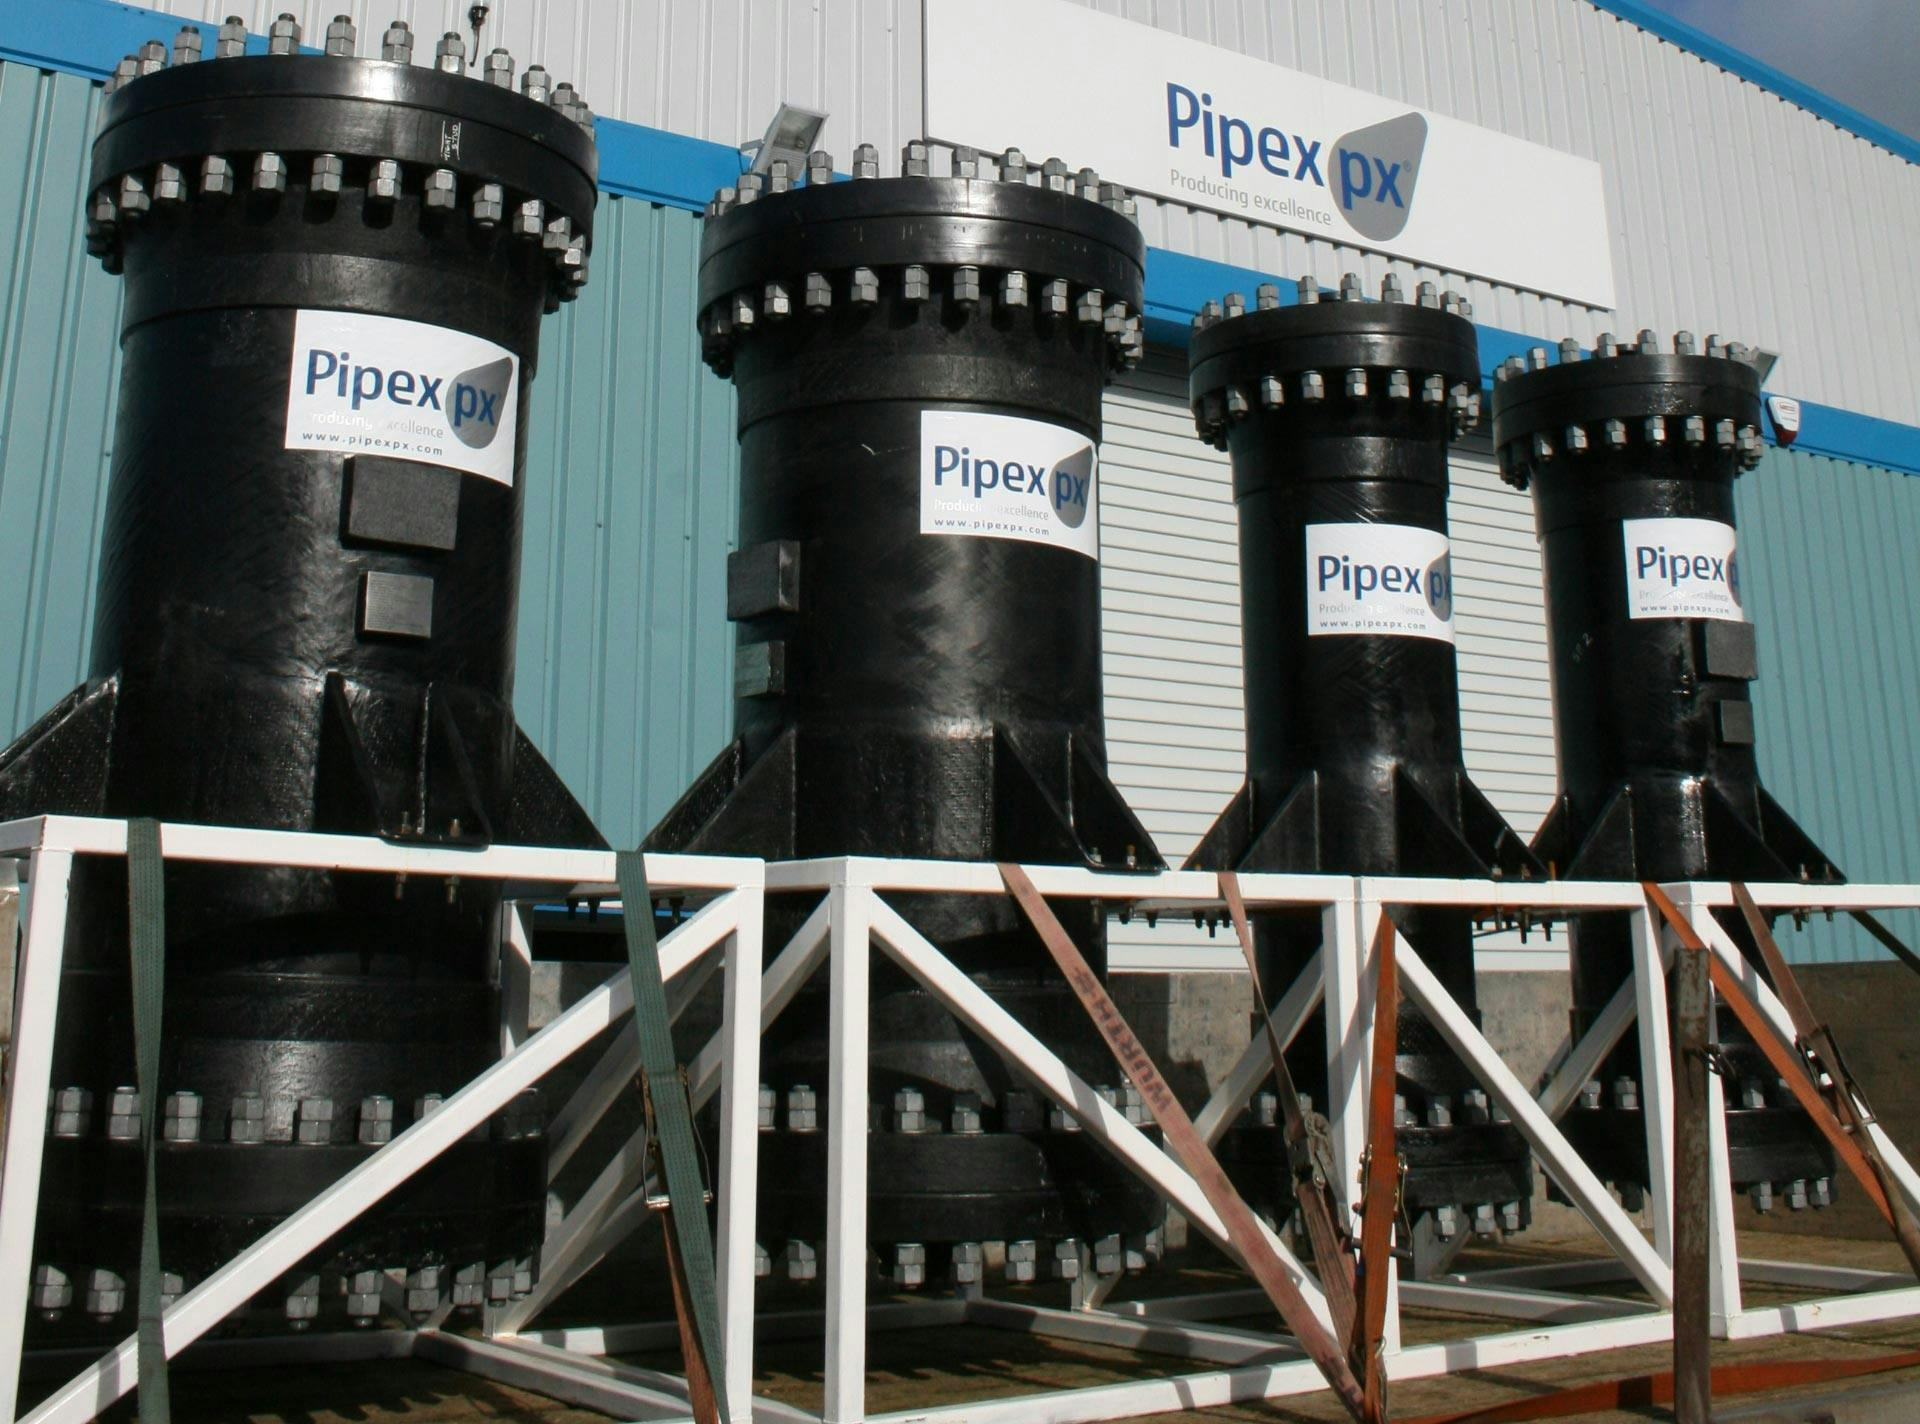 A series of Pipex PX pipes 